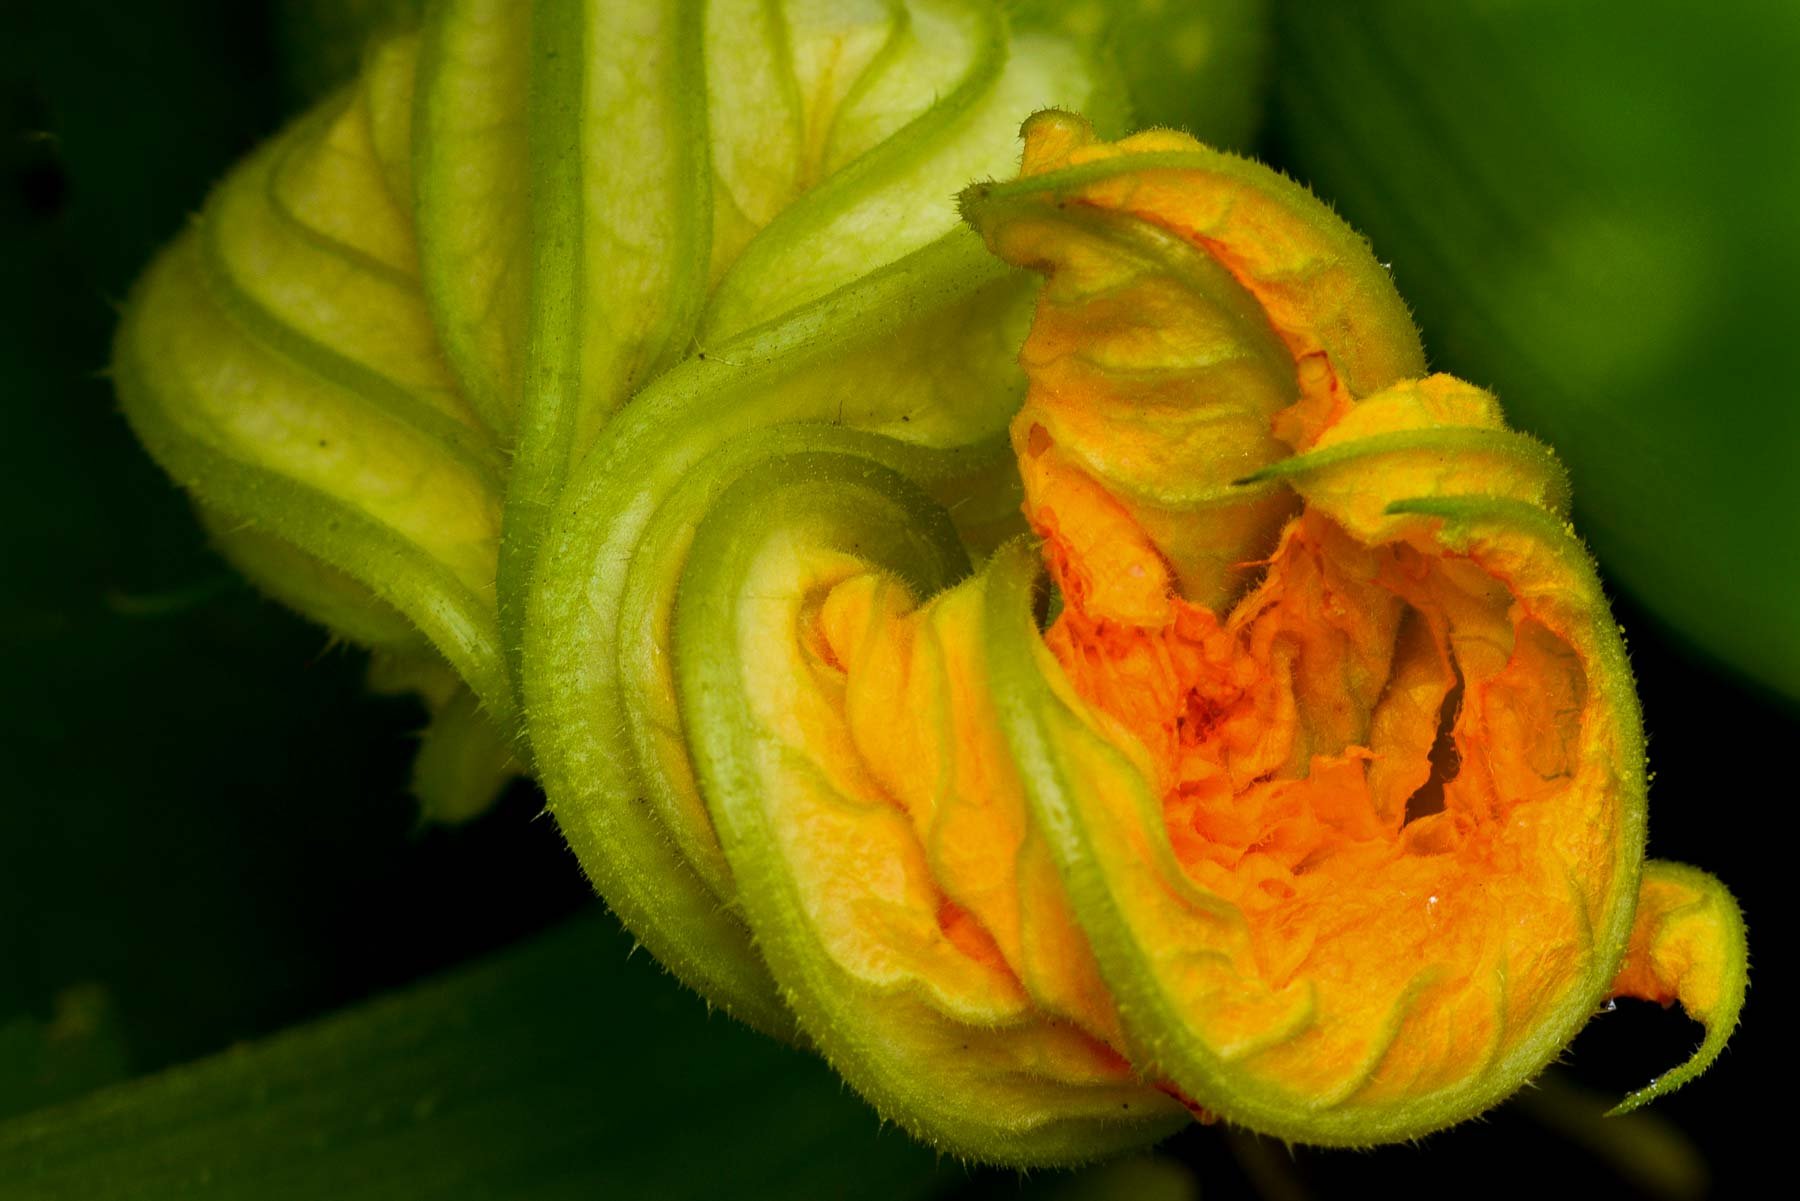  Courgette flower 